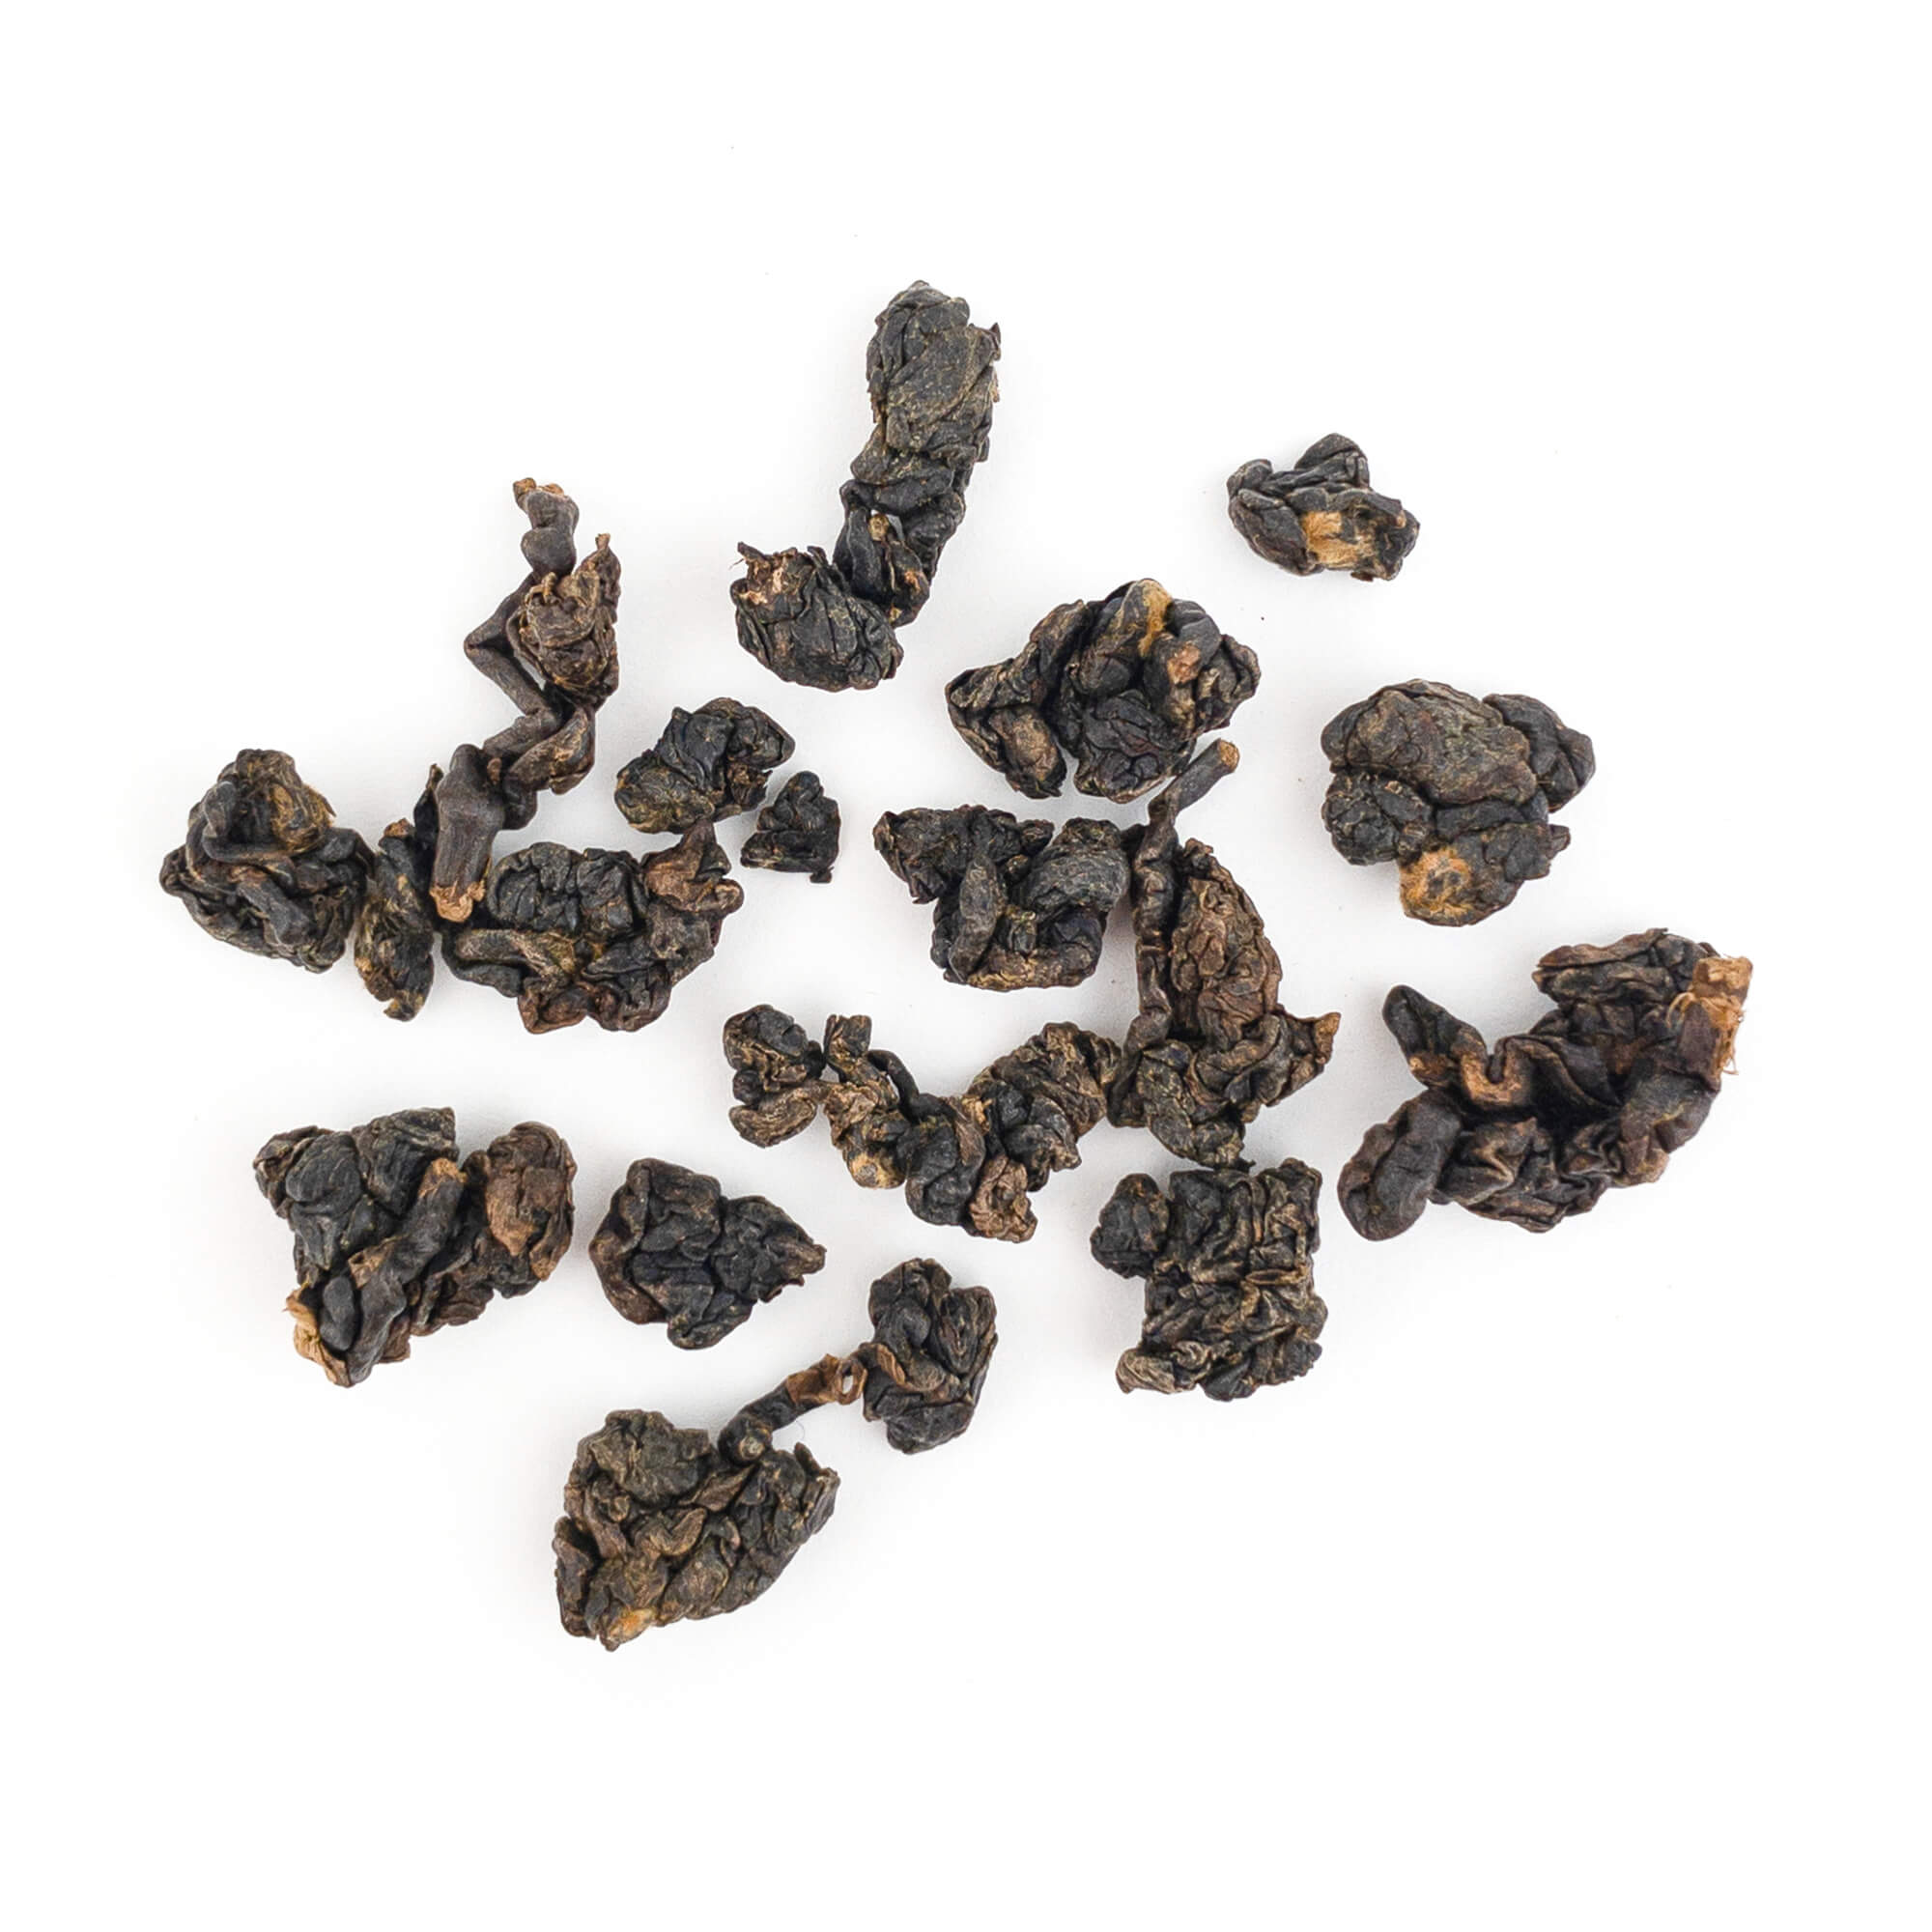 Taiwanese Red Oolong